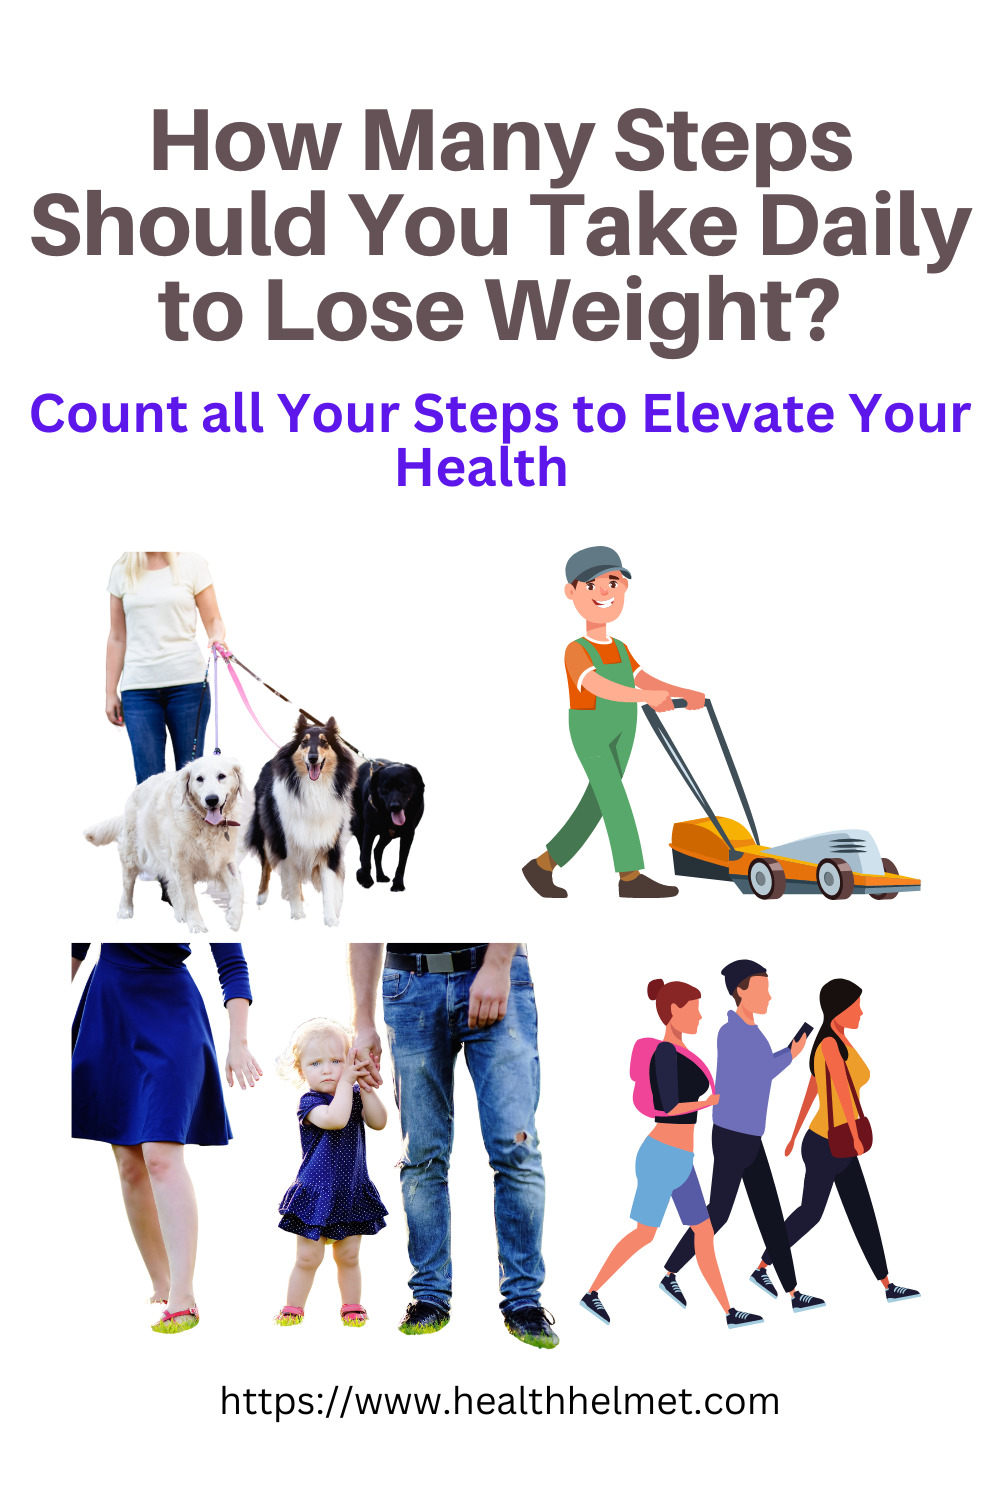 How-many-steps- you-should-take-daily-to-lose-weight